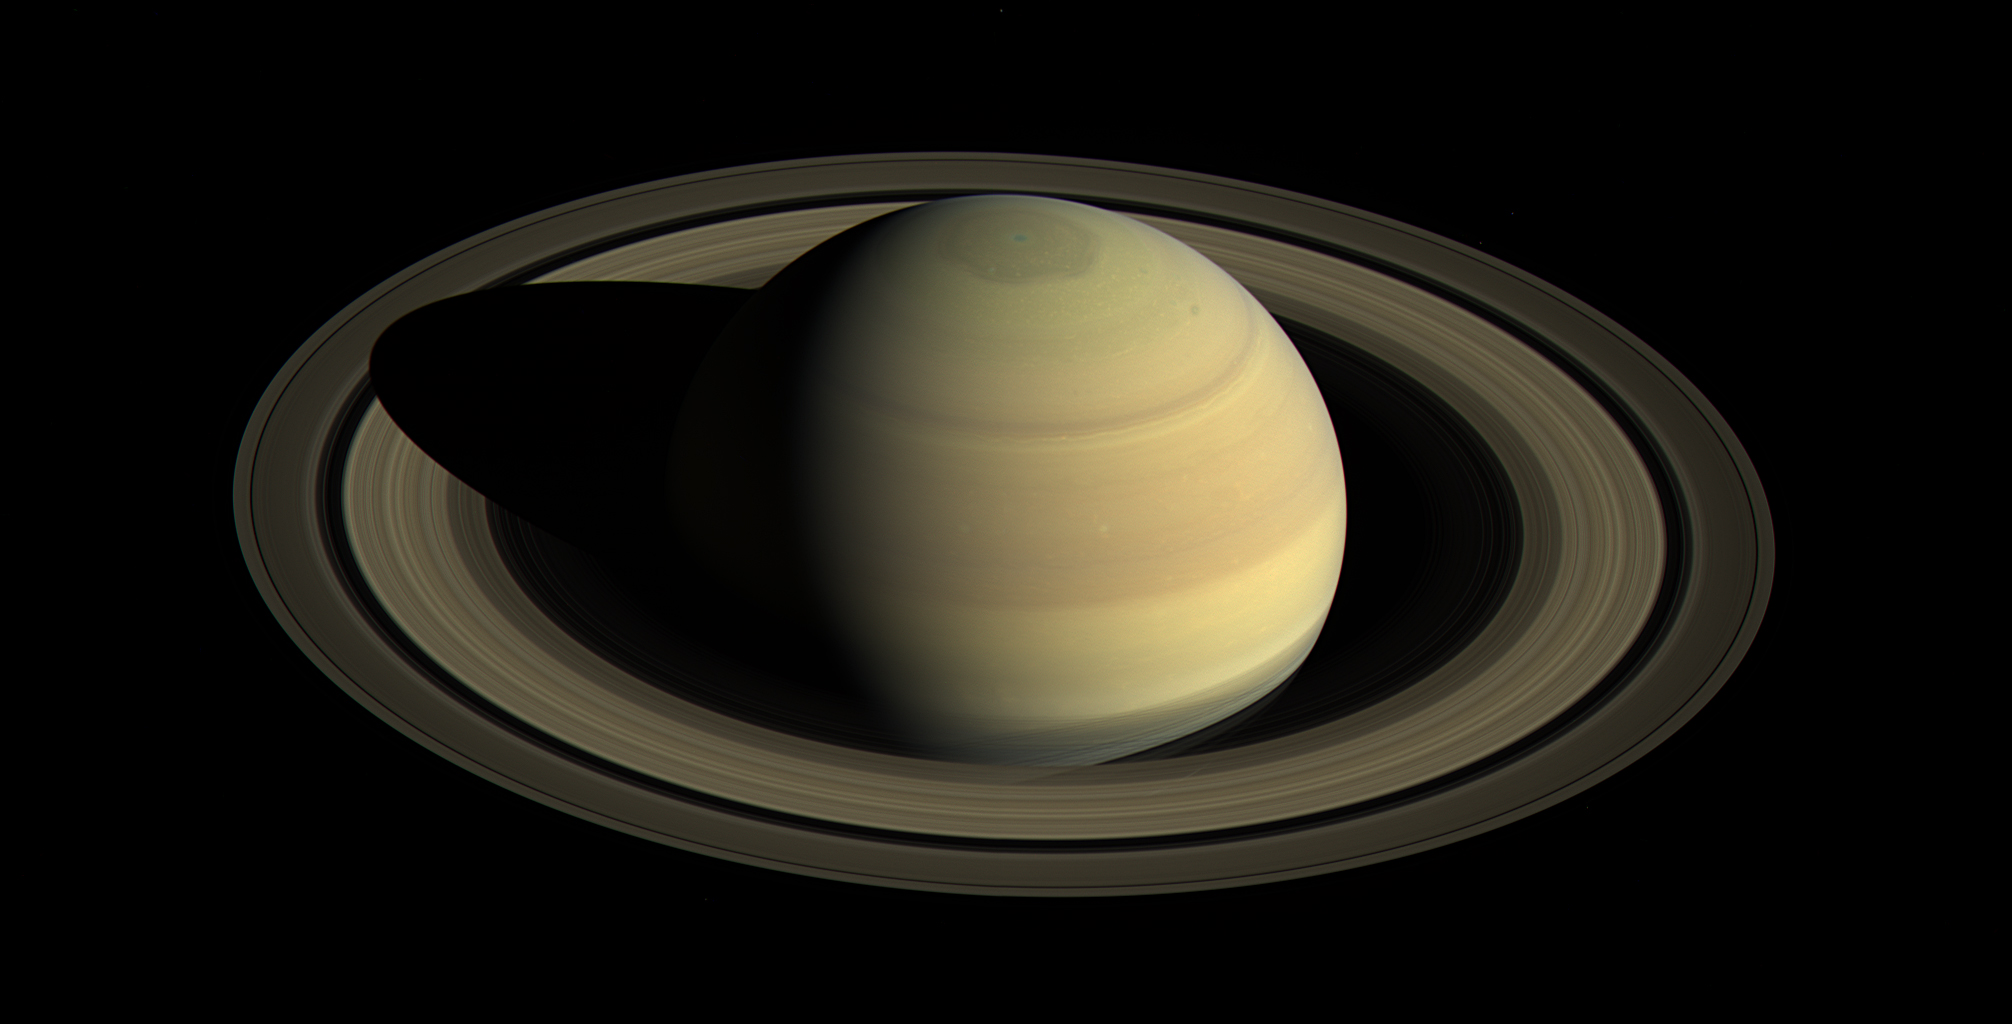 Saturn, Approaching Northern Summer – Cassini Legacy: 1997-2017